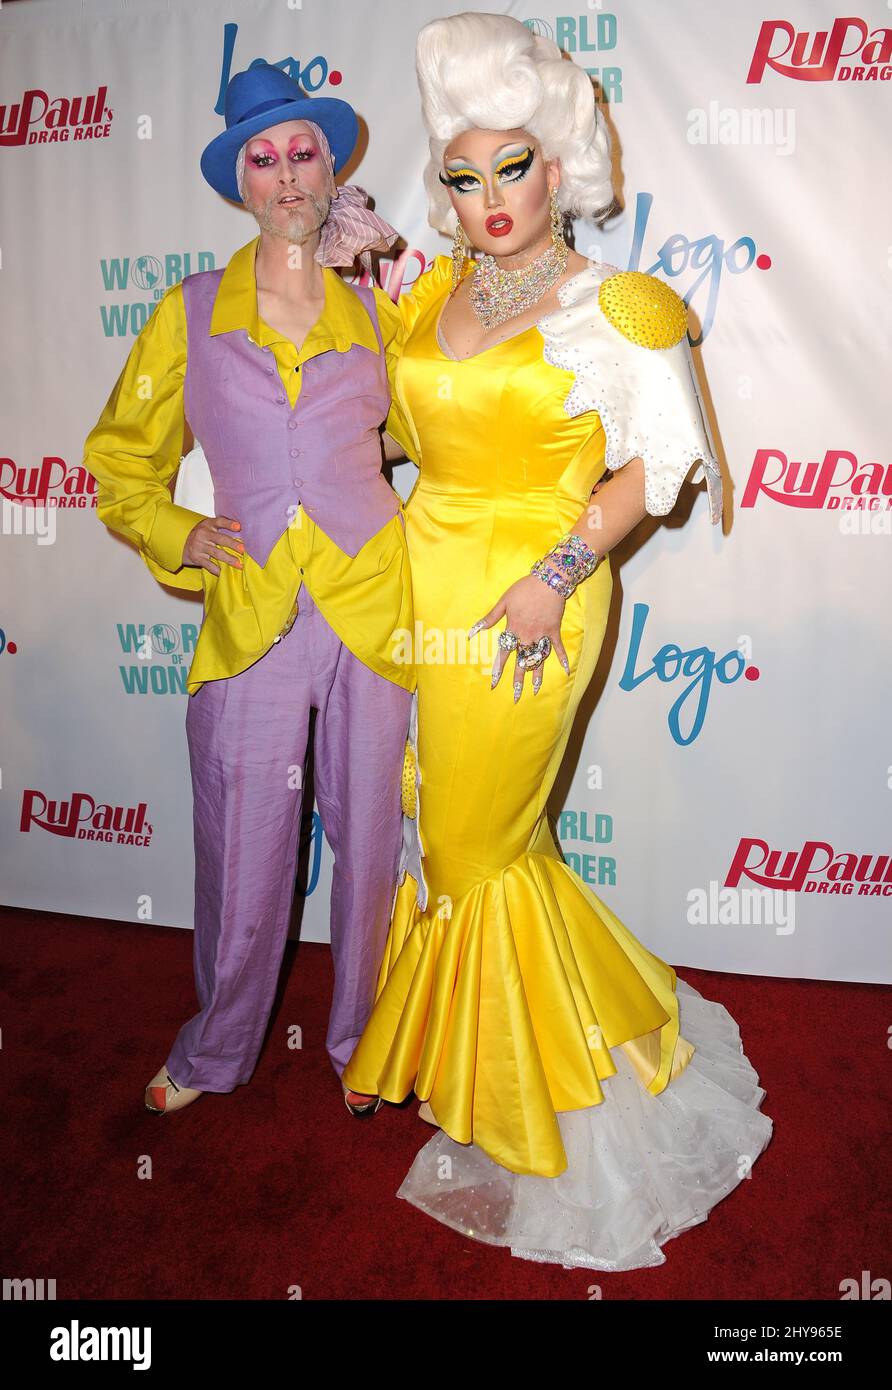 Mathu Andersen and Kim Chi attend RuPaul's Drag Race Season 8 Premiere held at the Mayan Theater Stock Photo